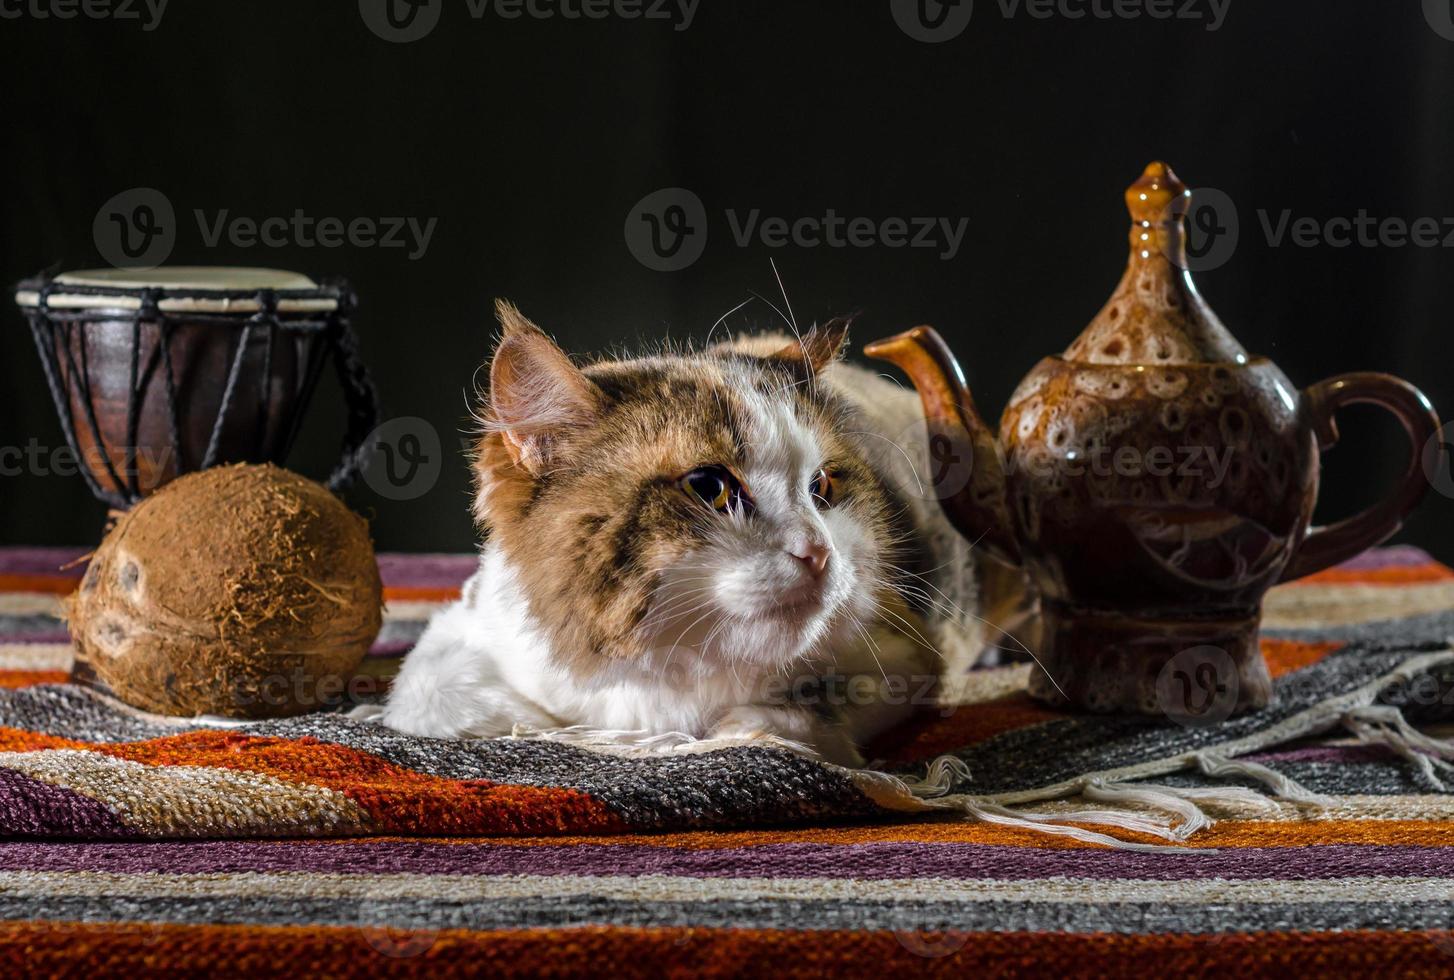 Cat with teakettle and bread photo